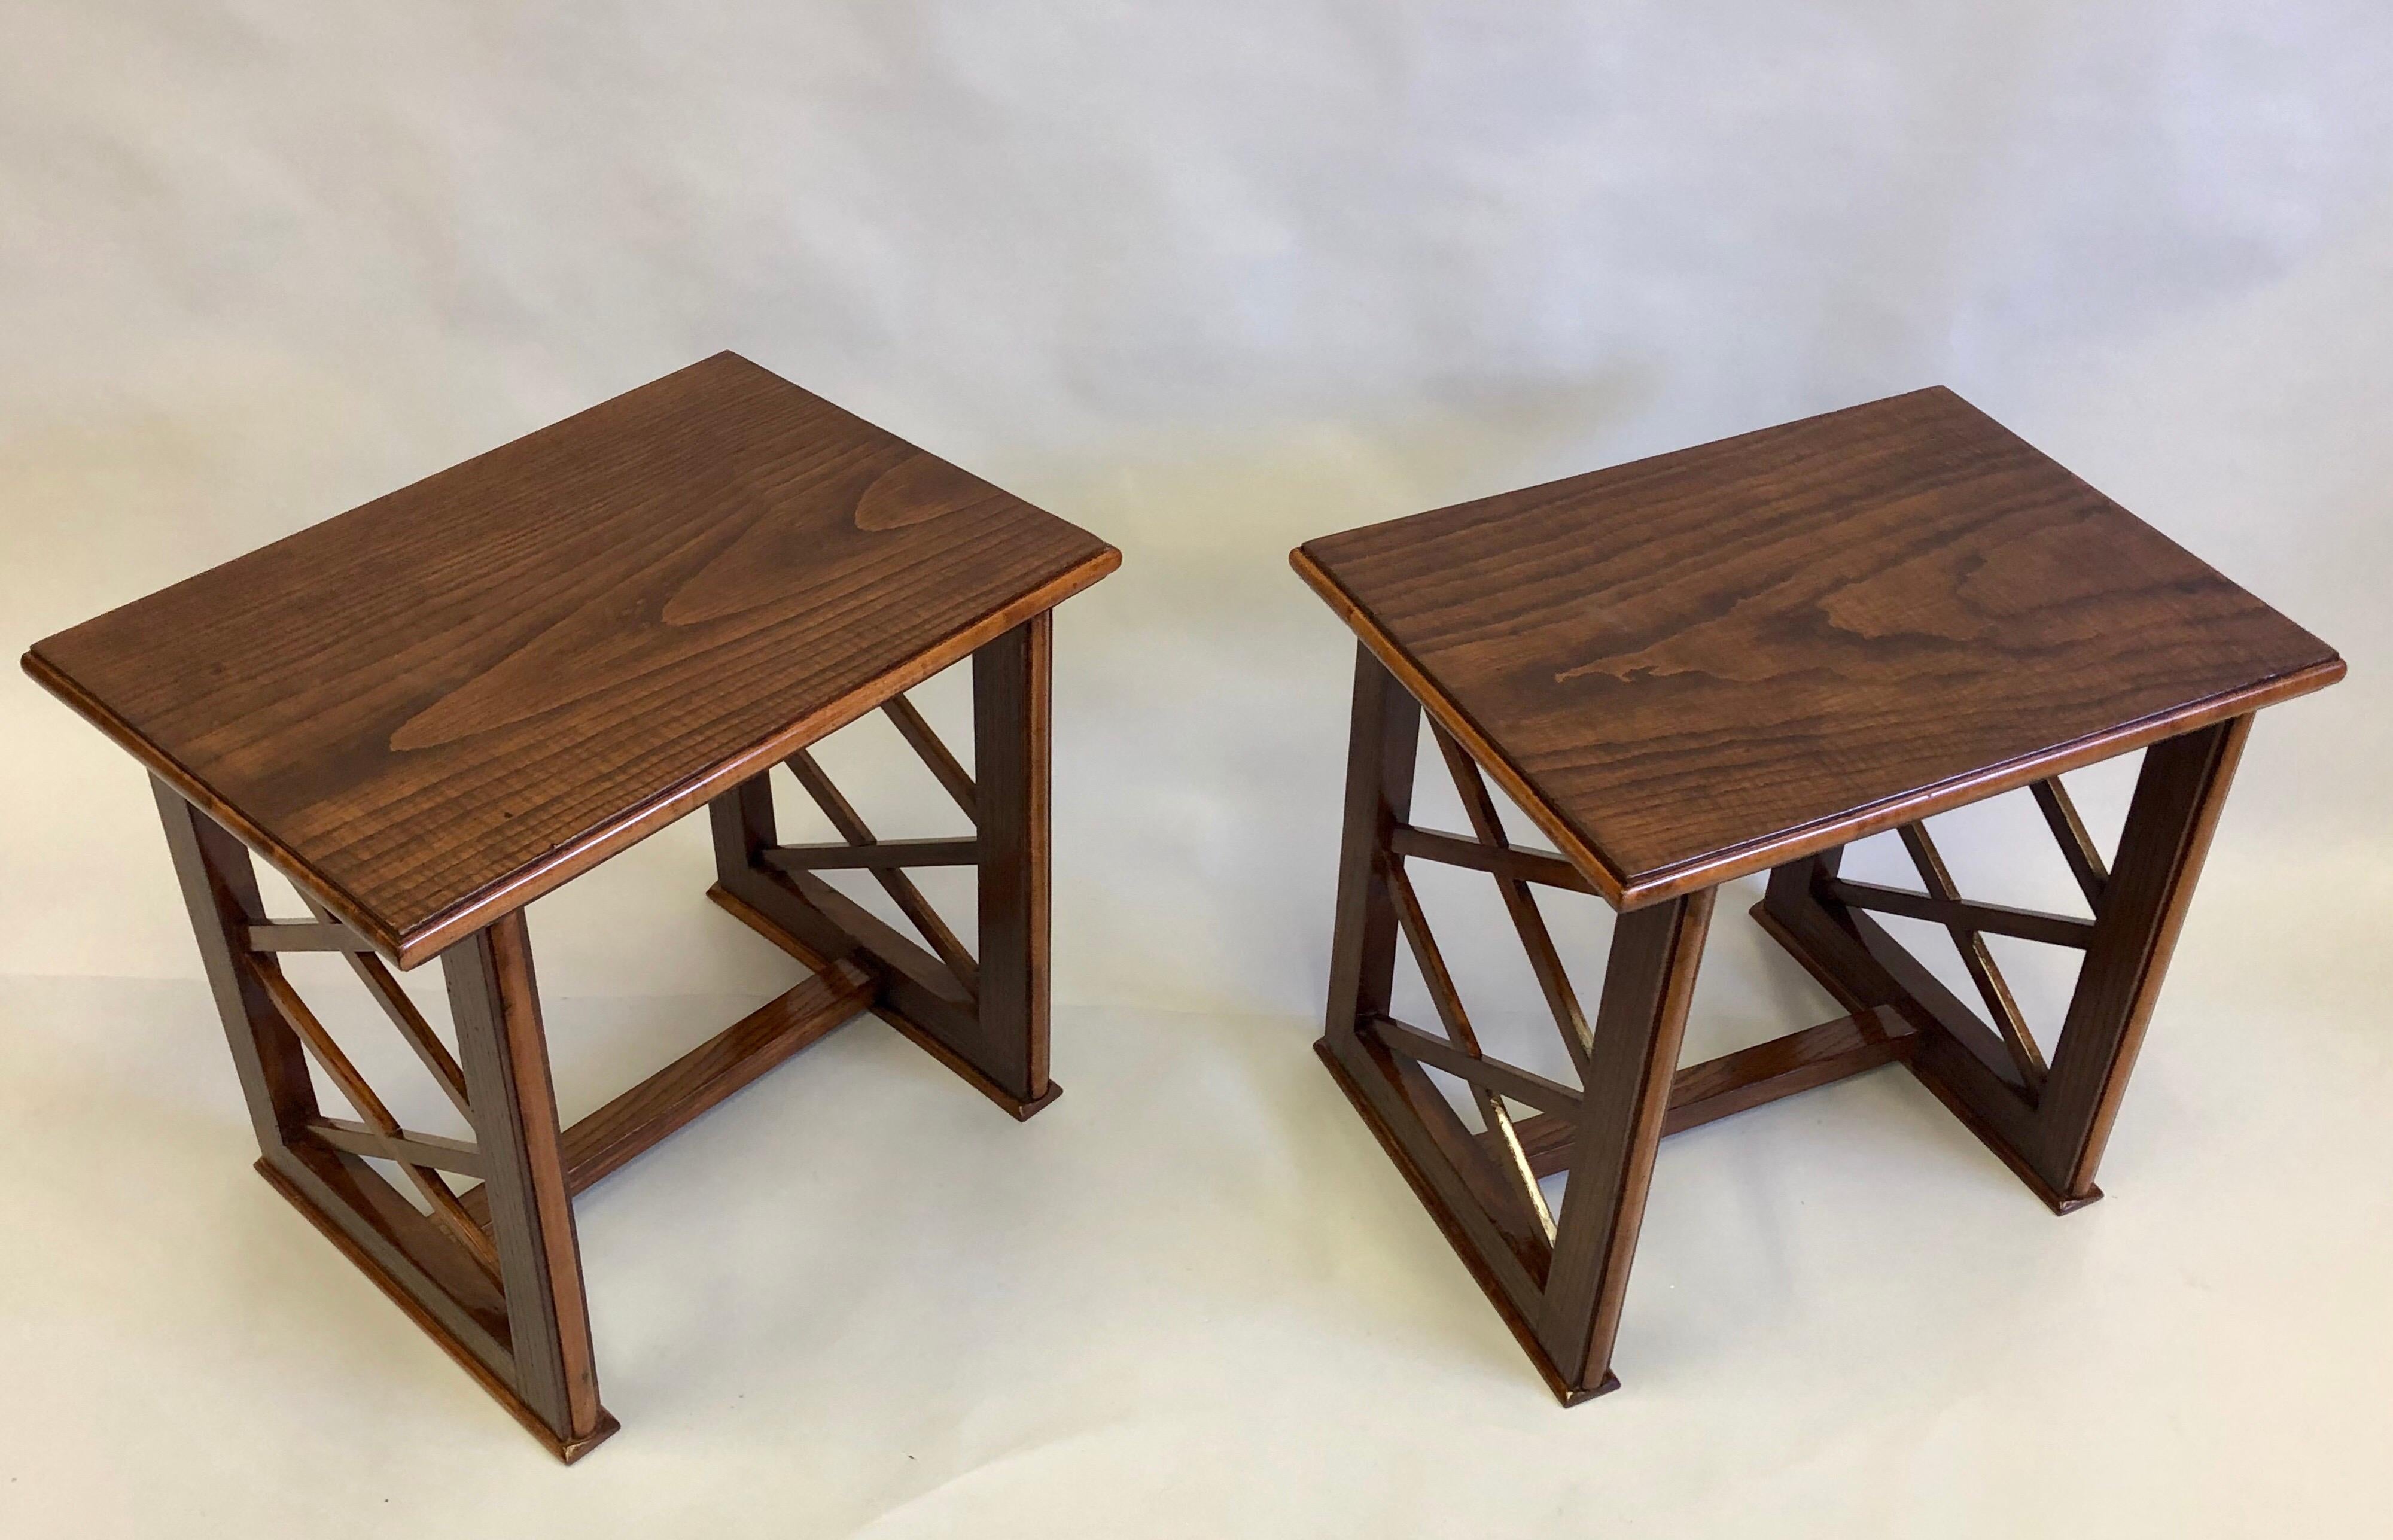 Pair of French Mid-Century Modern neoclassical wood end or side tables in the style of Andre Arbus. These are now custom order pieces and custom sizes are available.

 